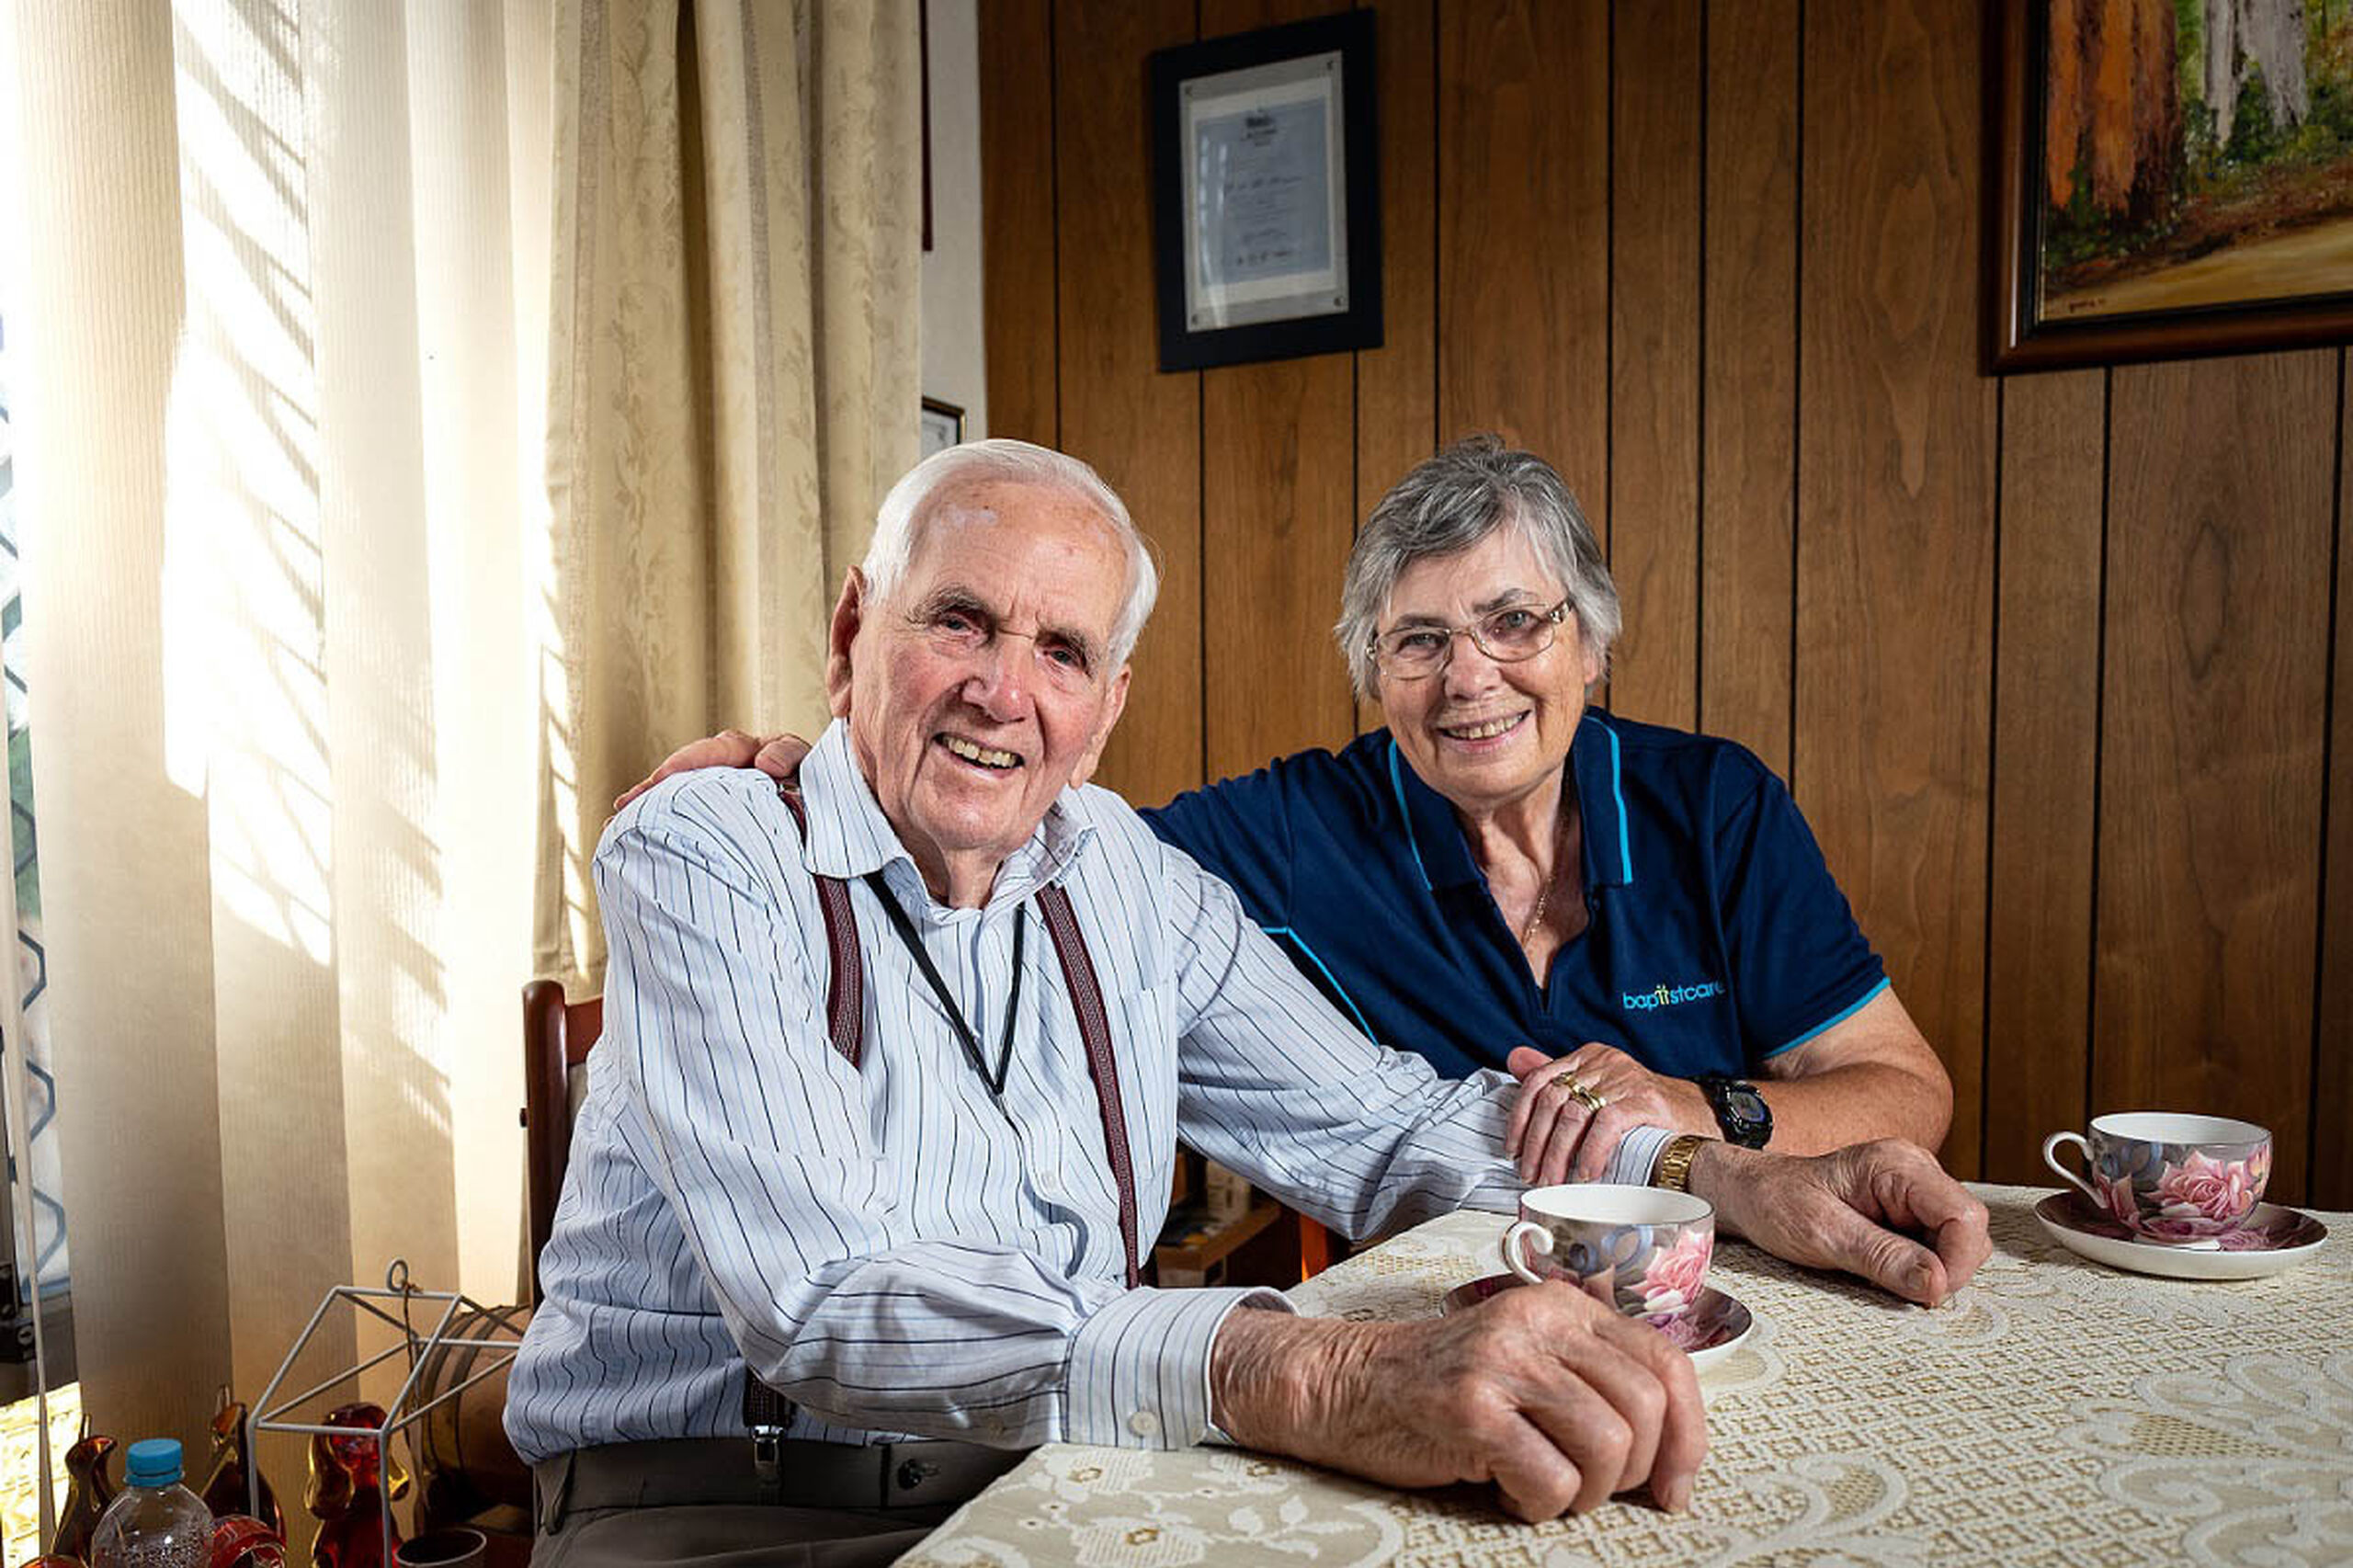 Home care bond spans 20 years